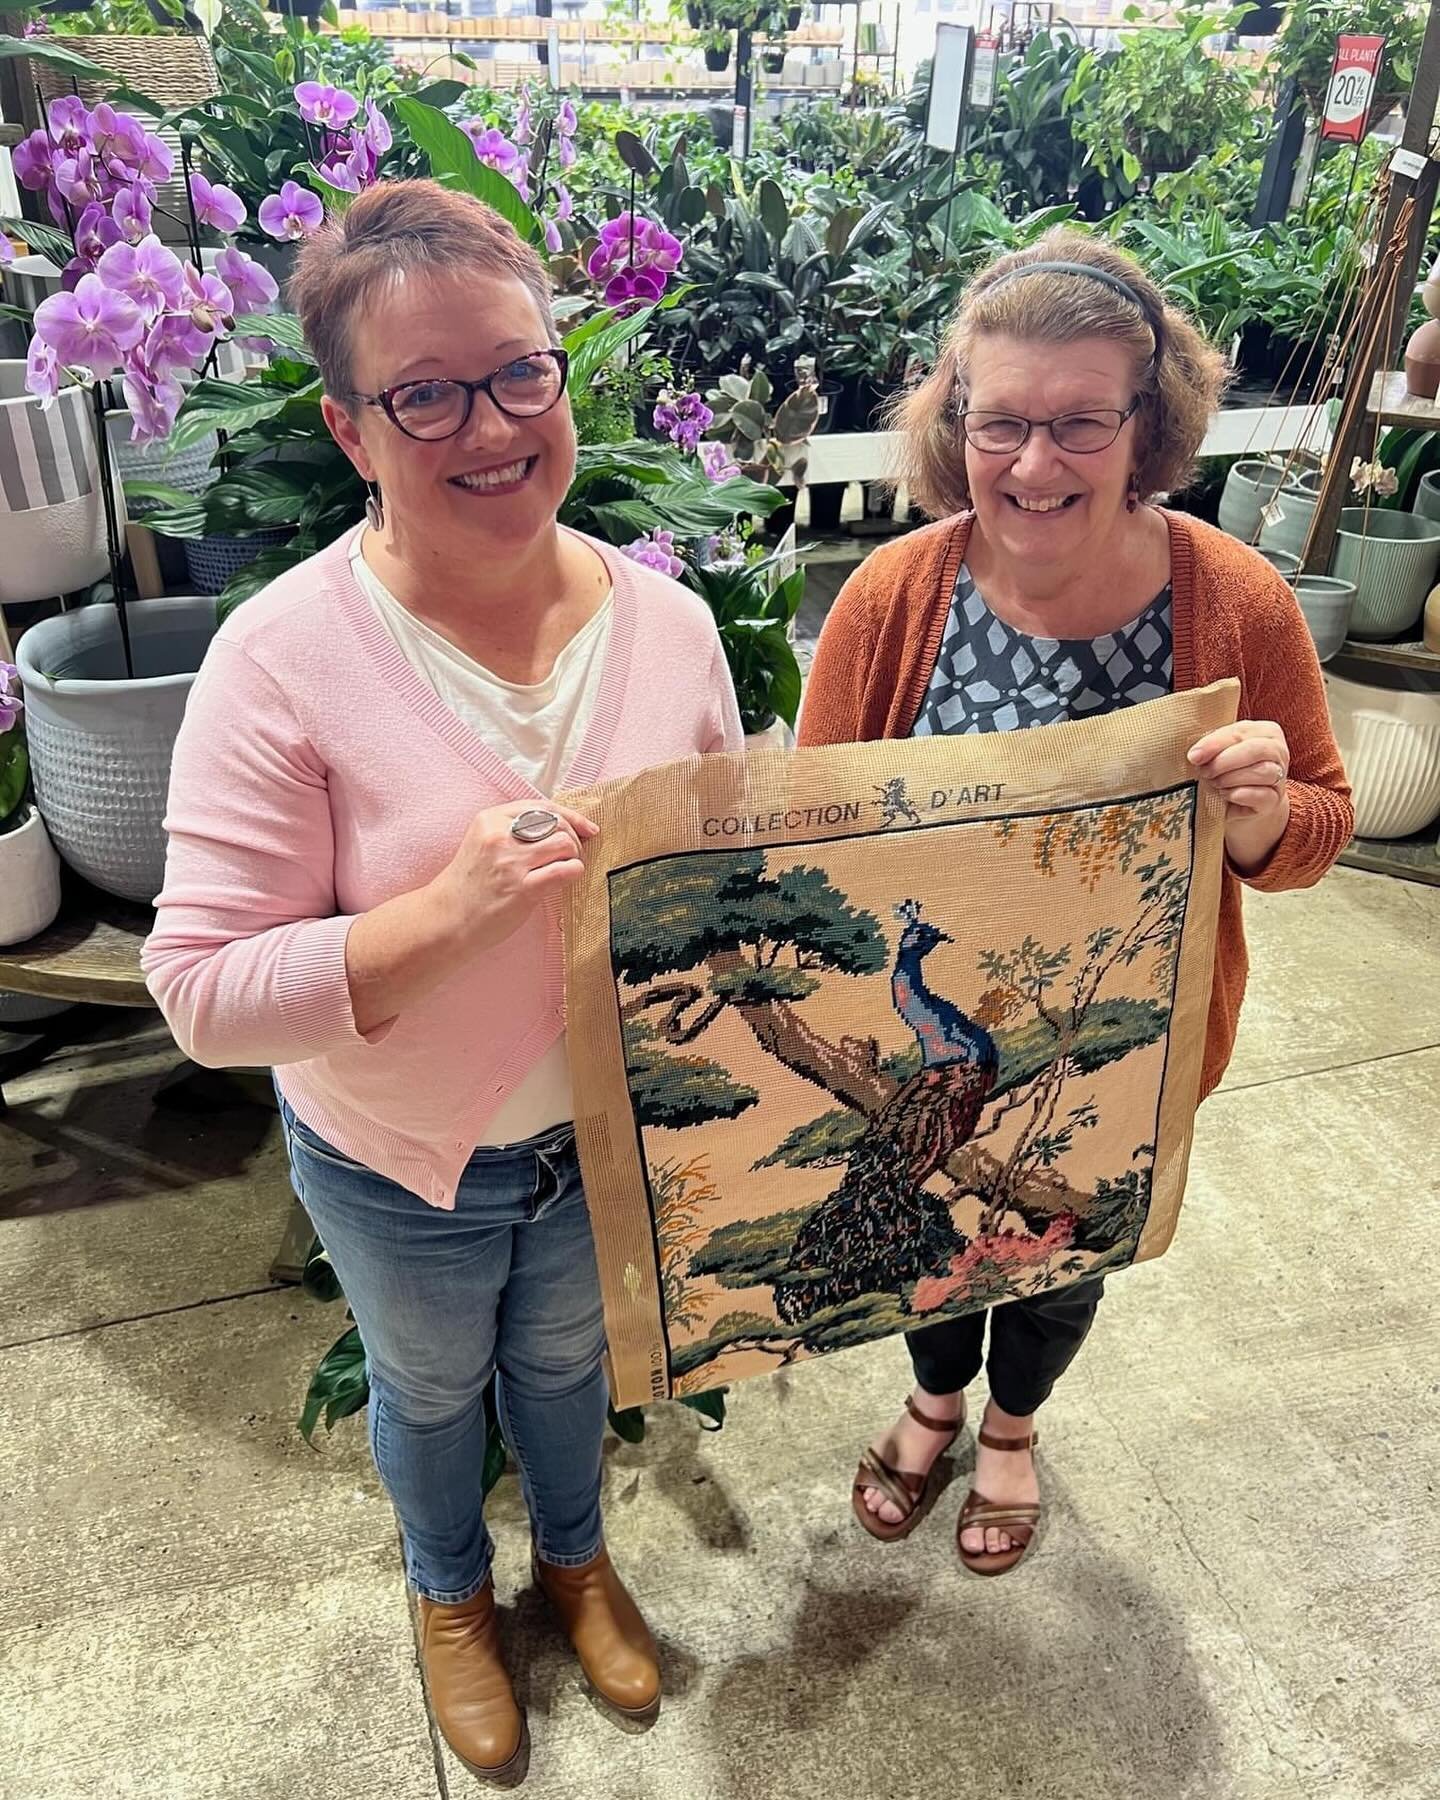 Sadly my Mum, Elaine, passed away a few weeks before [this tapestry] was completed, but I am delighted to have this special memory of her to keep and share with our family. It was lovely to meet Melody (Loose Ends finisher) in person. My dear Mum had